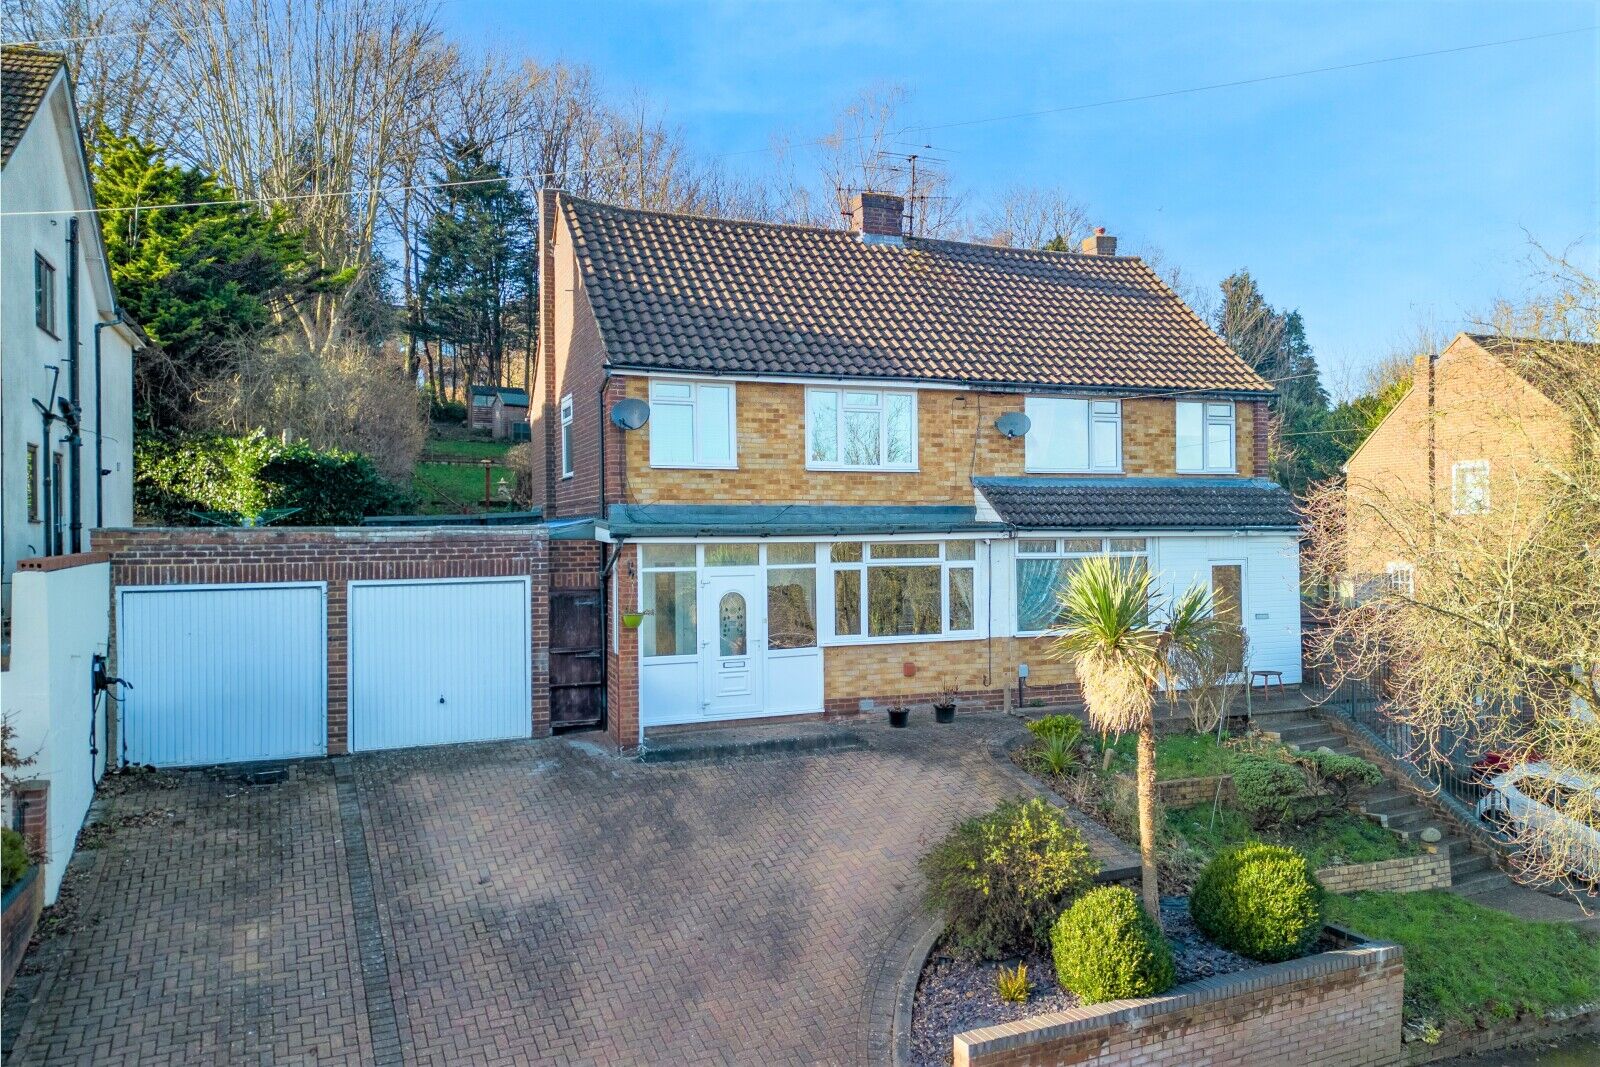 3 bedroom semi detached house for sale Deeds Grove, High Wycombe, HP12, main image